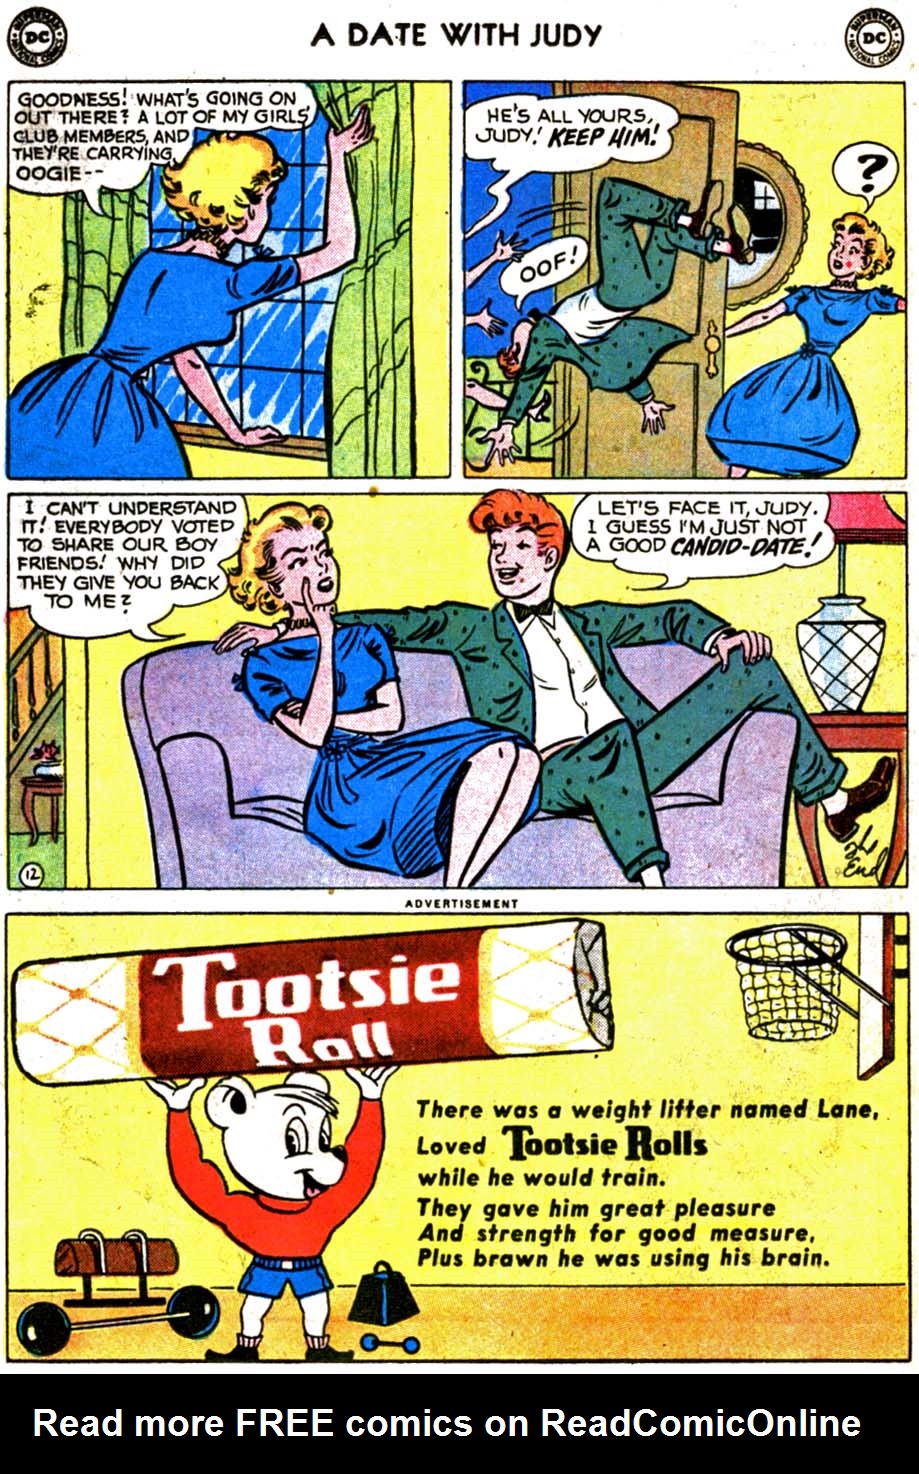 Read online A Date with Judy comic -  Issue #70 - 14